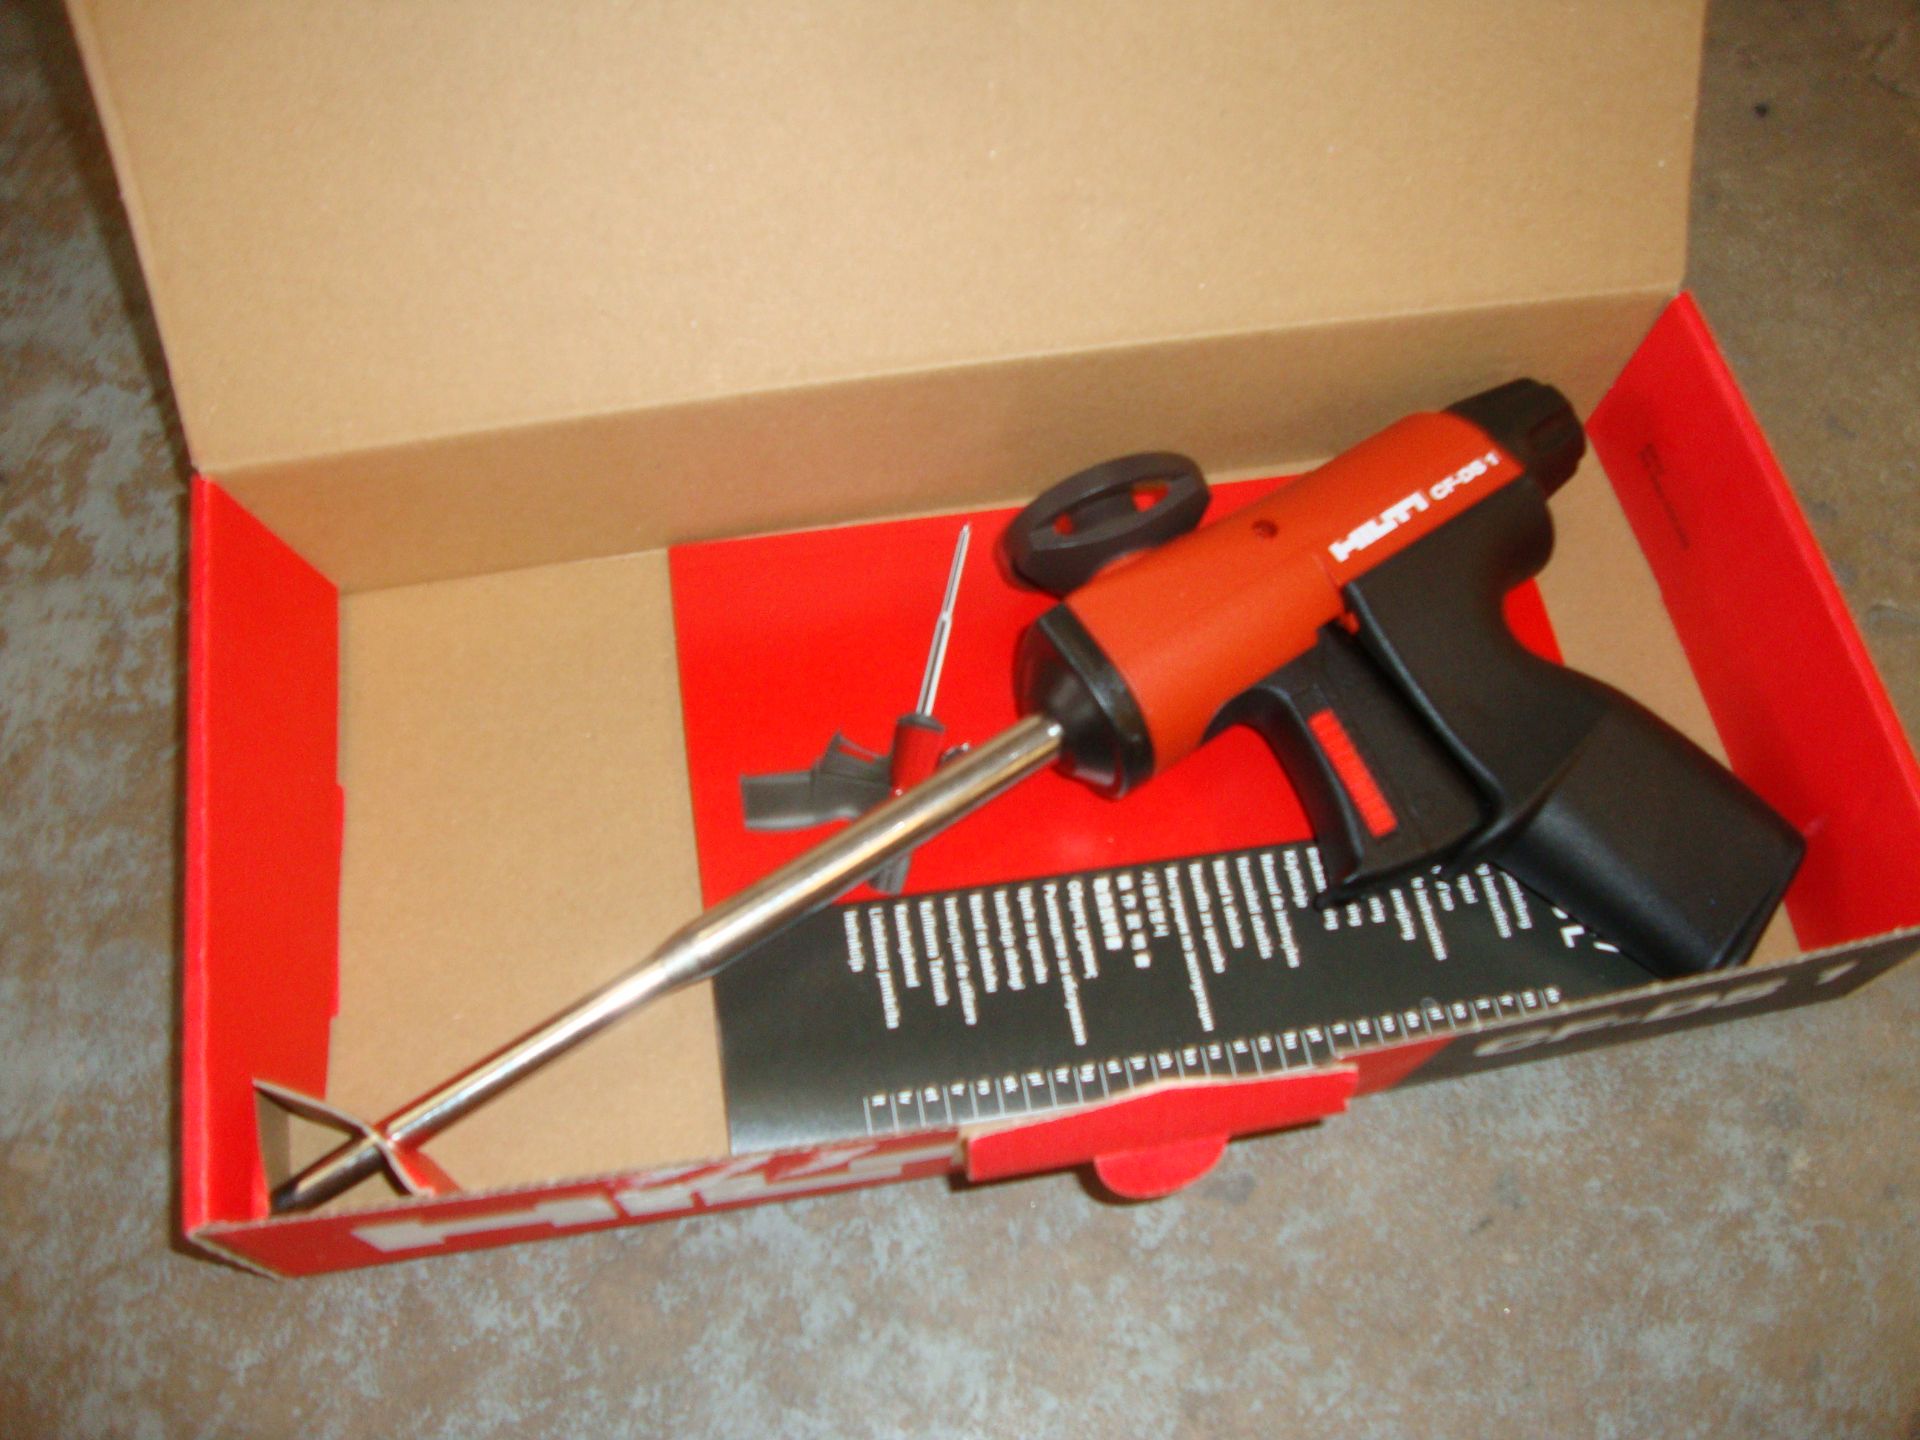 Hilti model CF-DS1 dispenser gun - appears unused. Includes box and instruction booklet/manual - Image 2 of 2